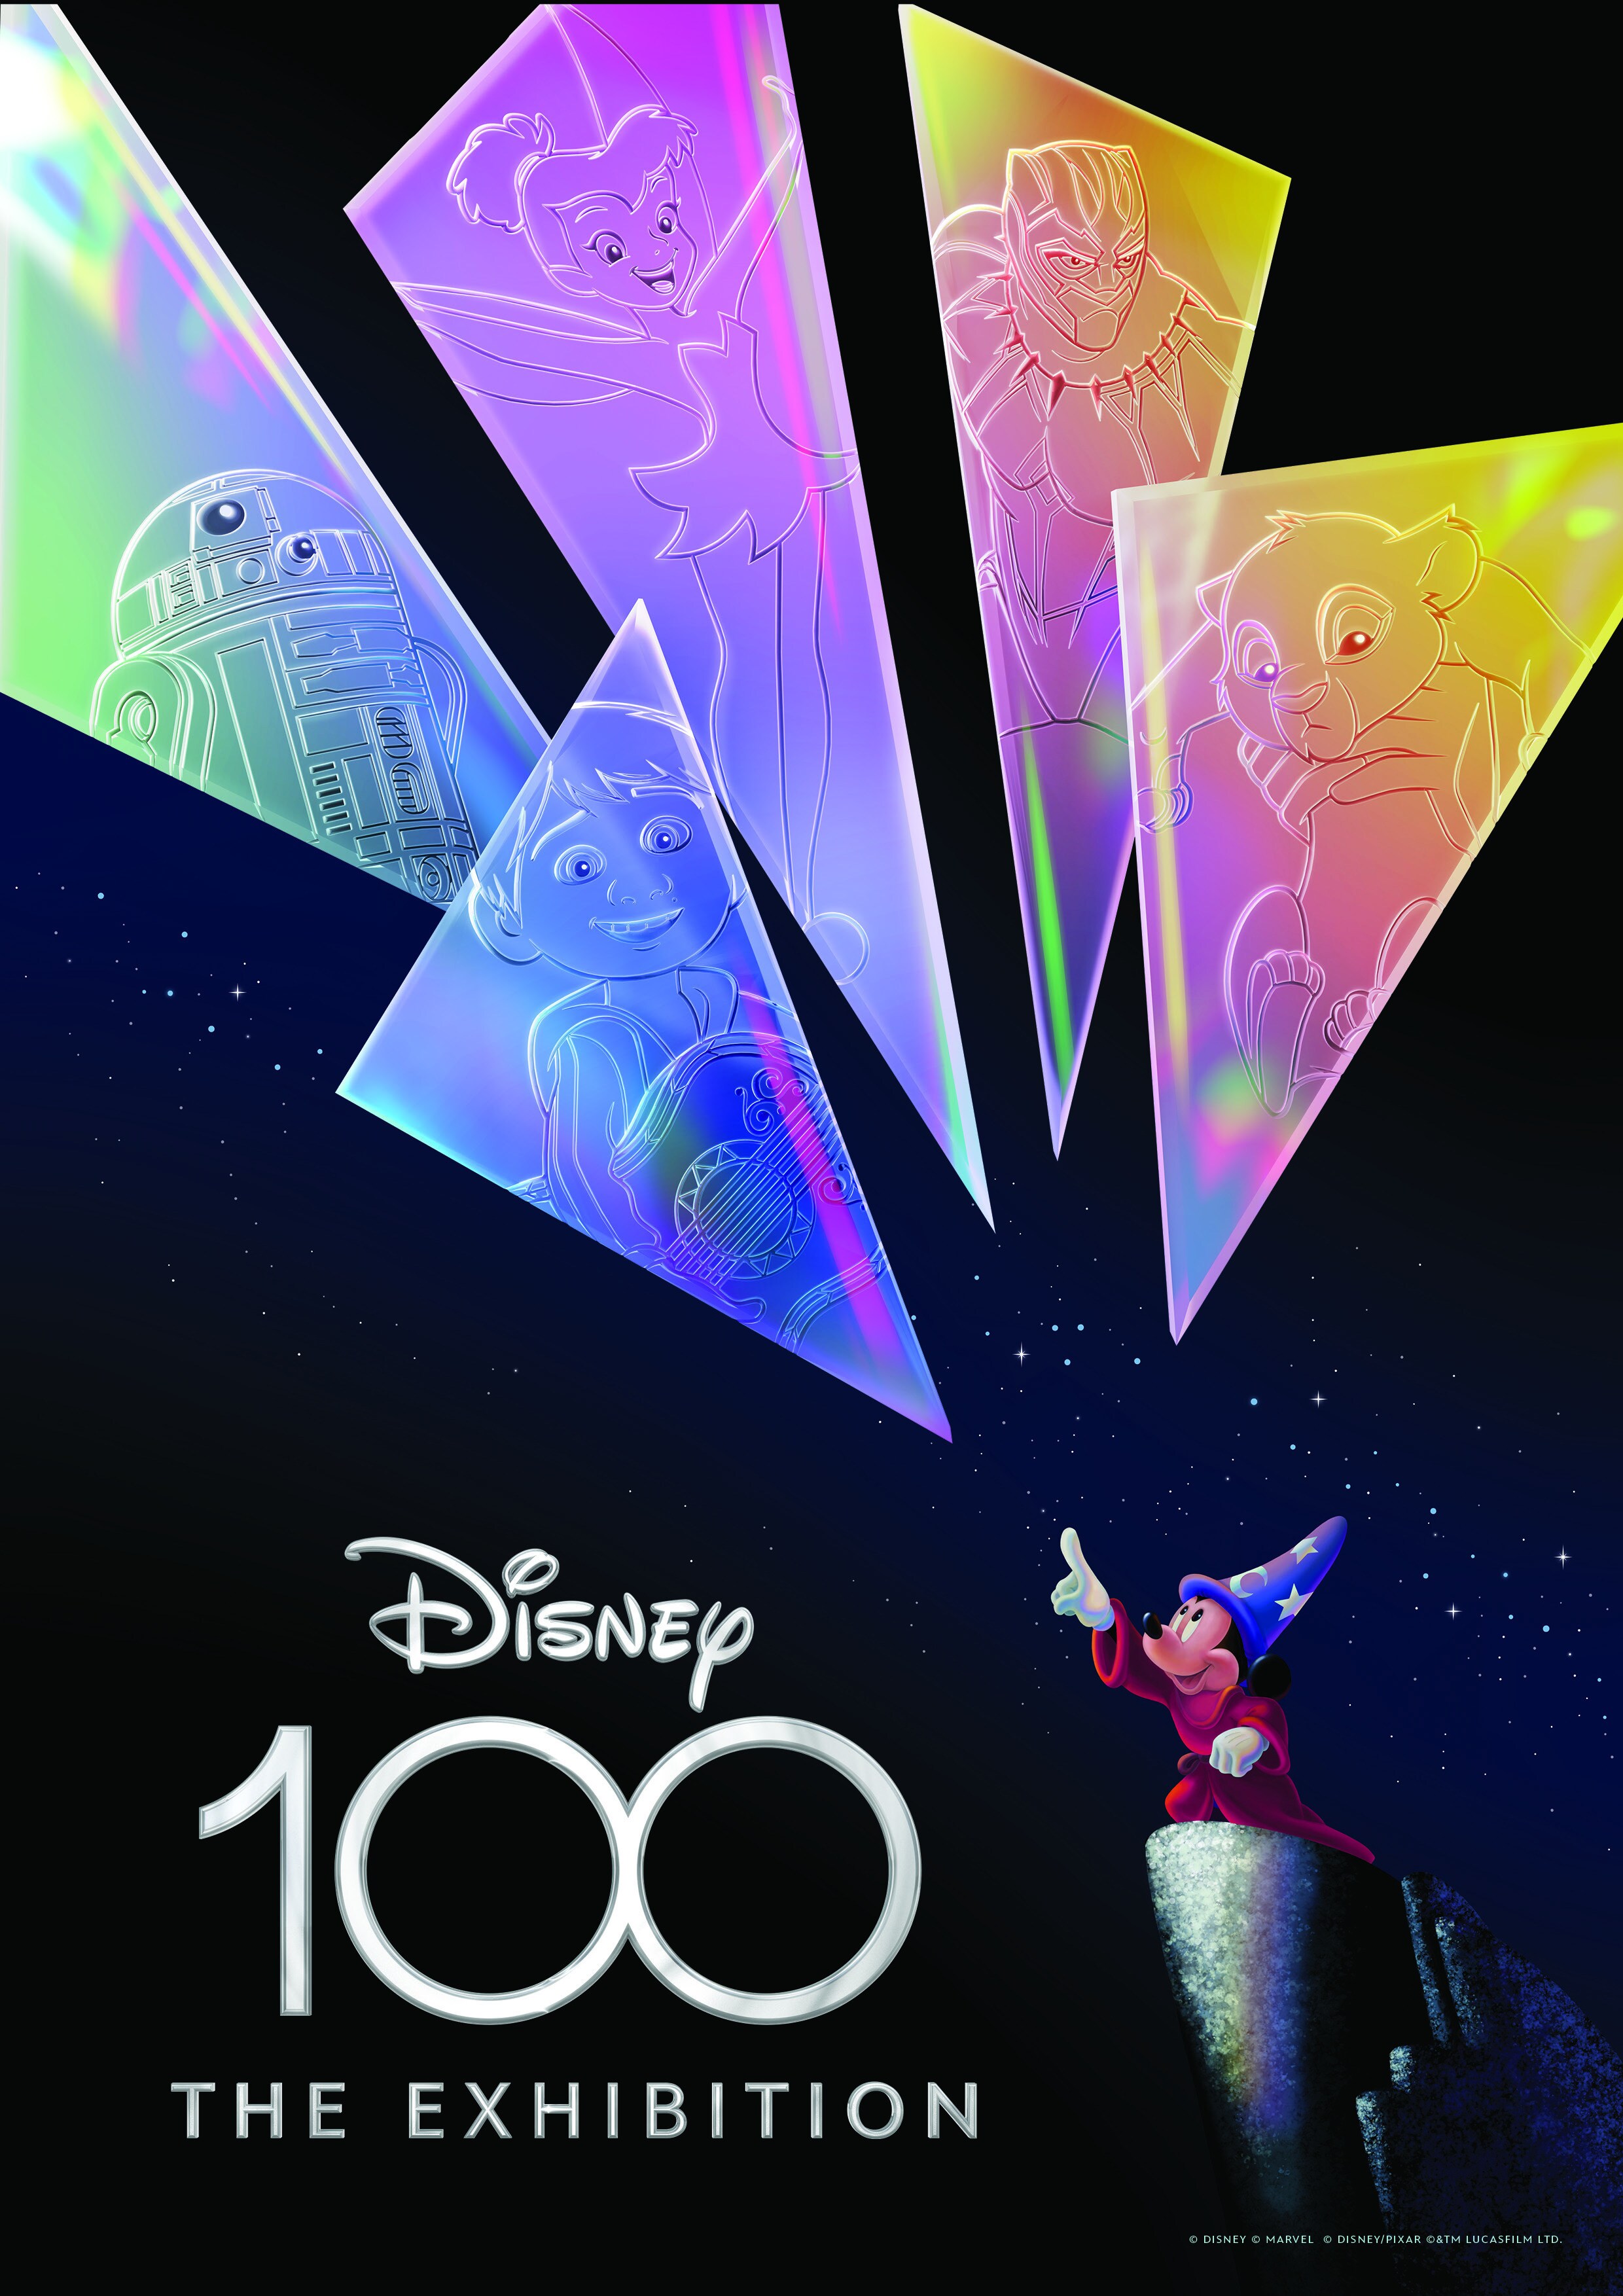 Celebrate Disney's 100th Anniversary with These Magical Products